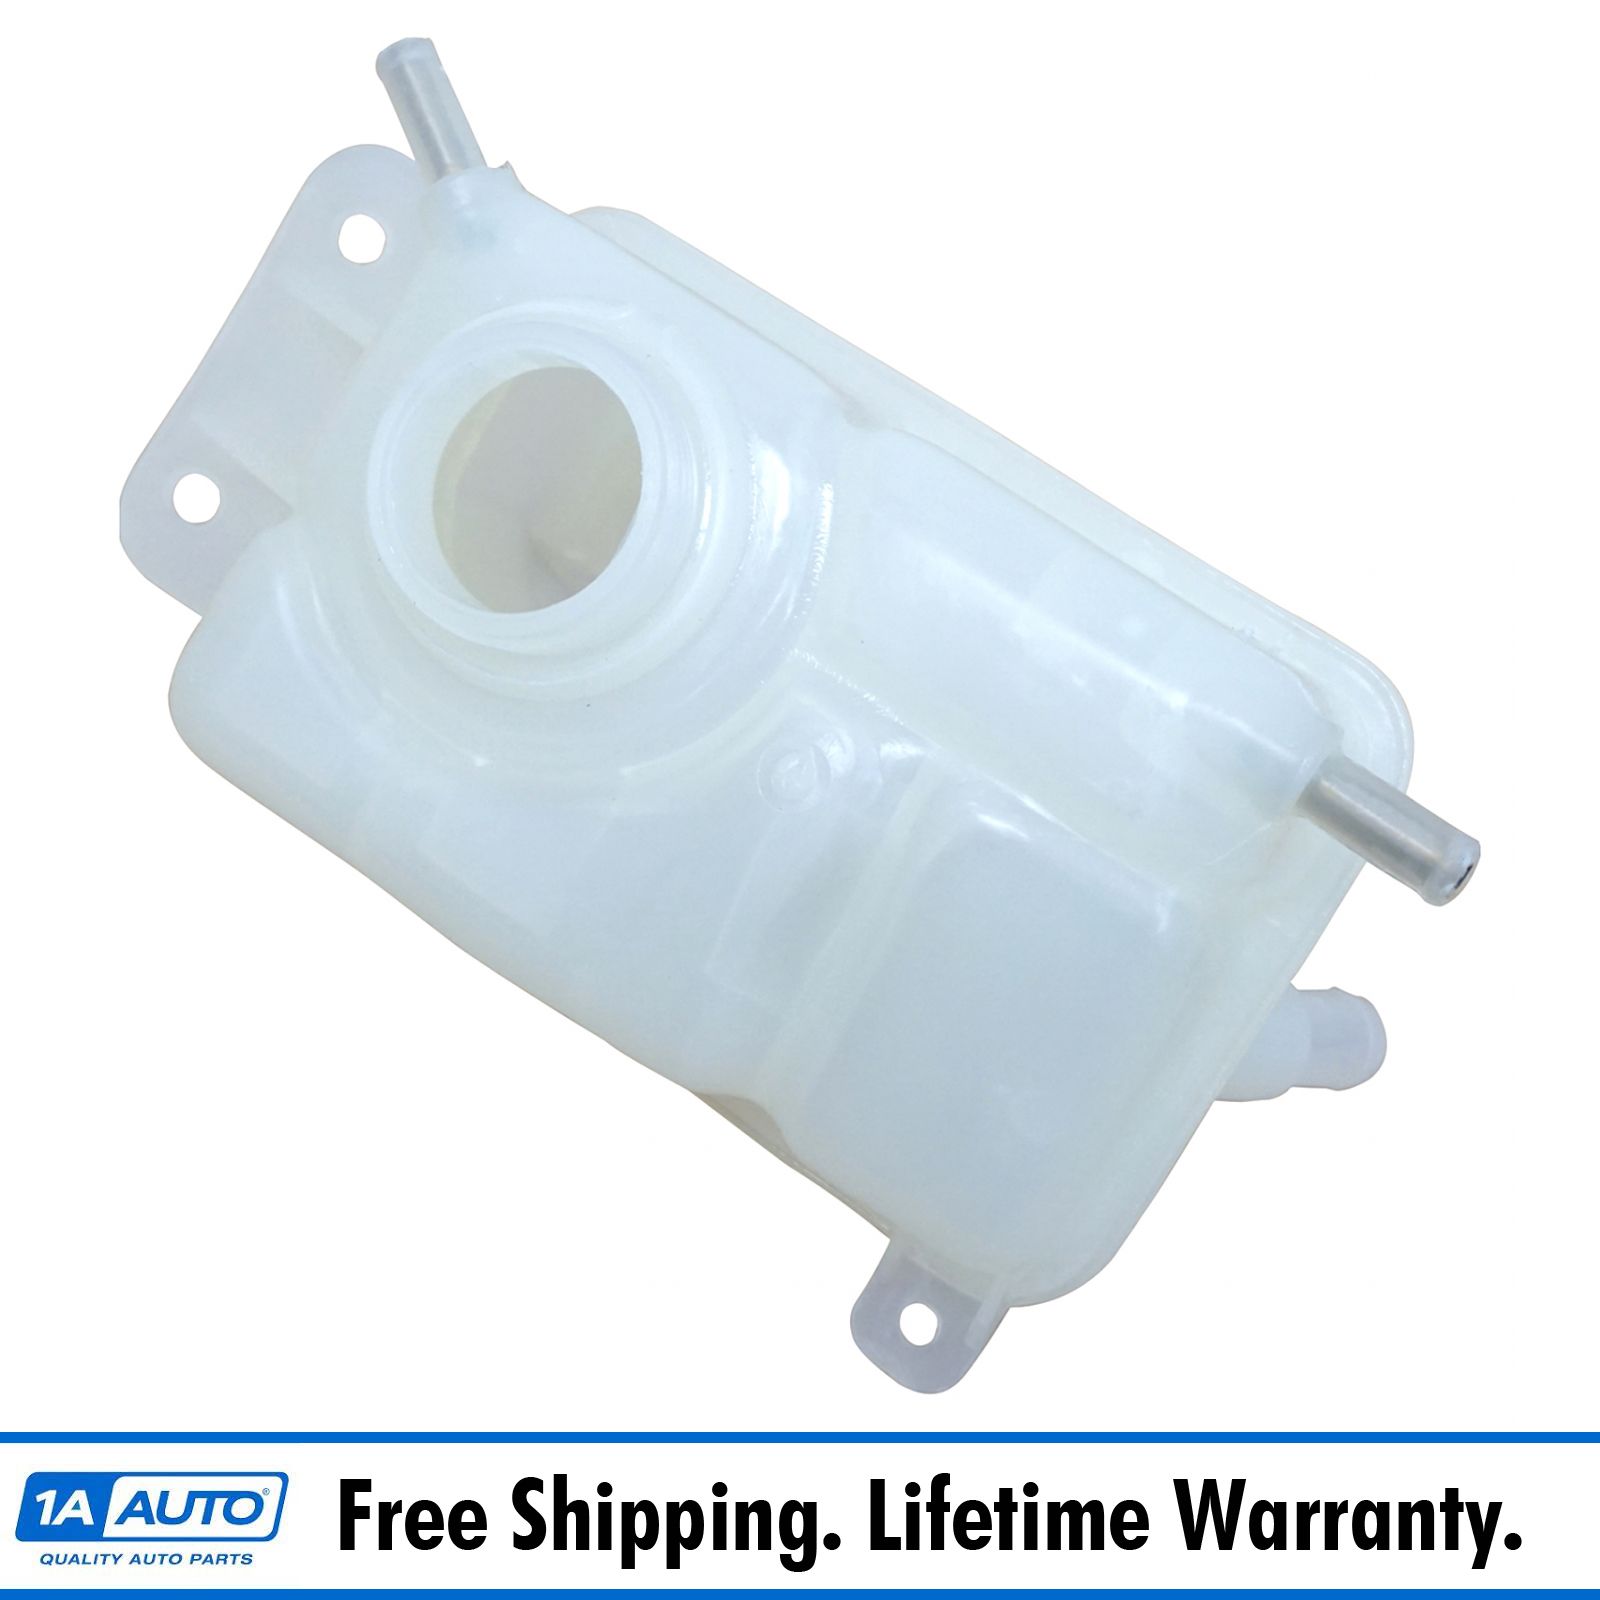 Coolant Reservoir Radiator Overflow Bottle Tank for Chevy Buick GM New